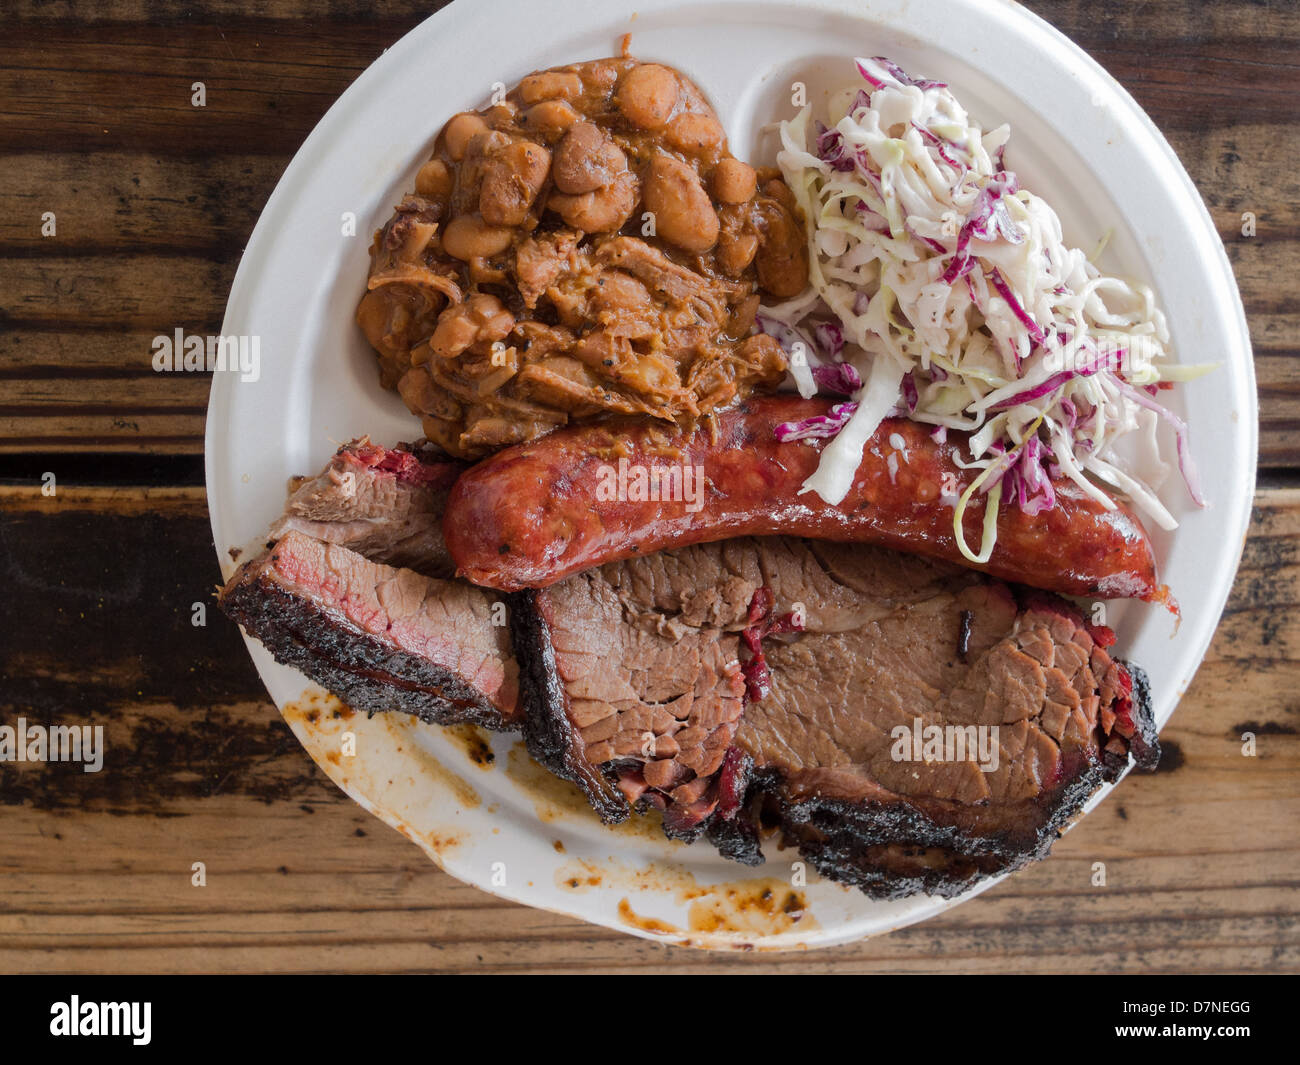 Beef brisket and sausage plate at Franklin BBQ Stock Photo